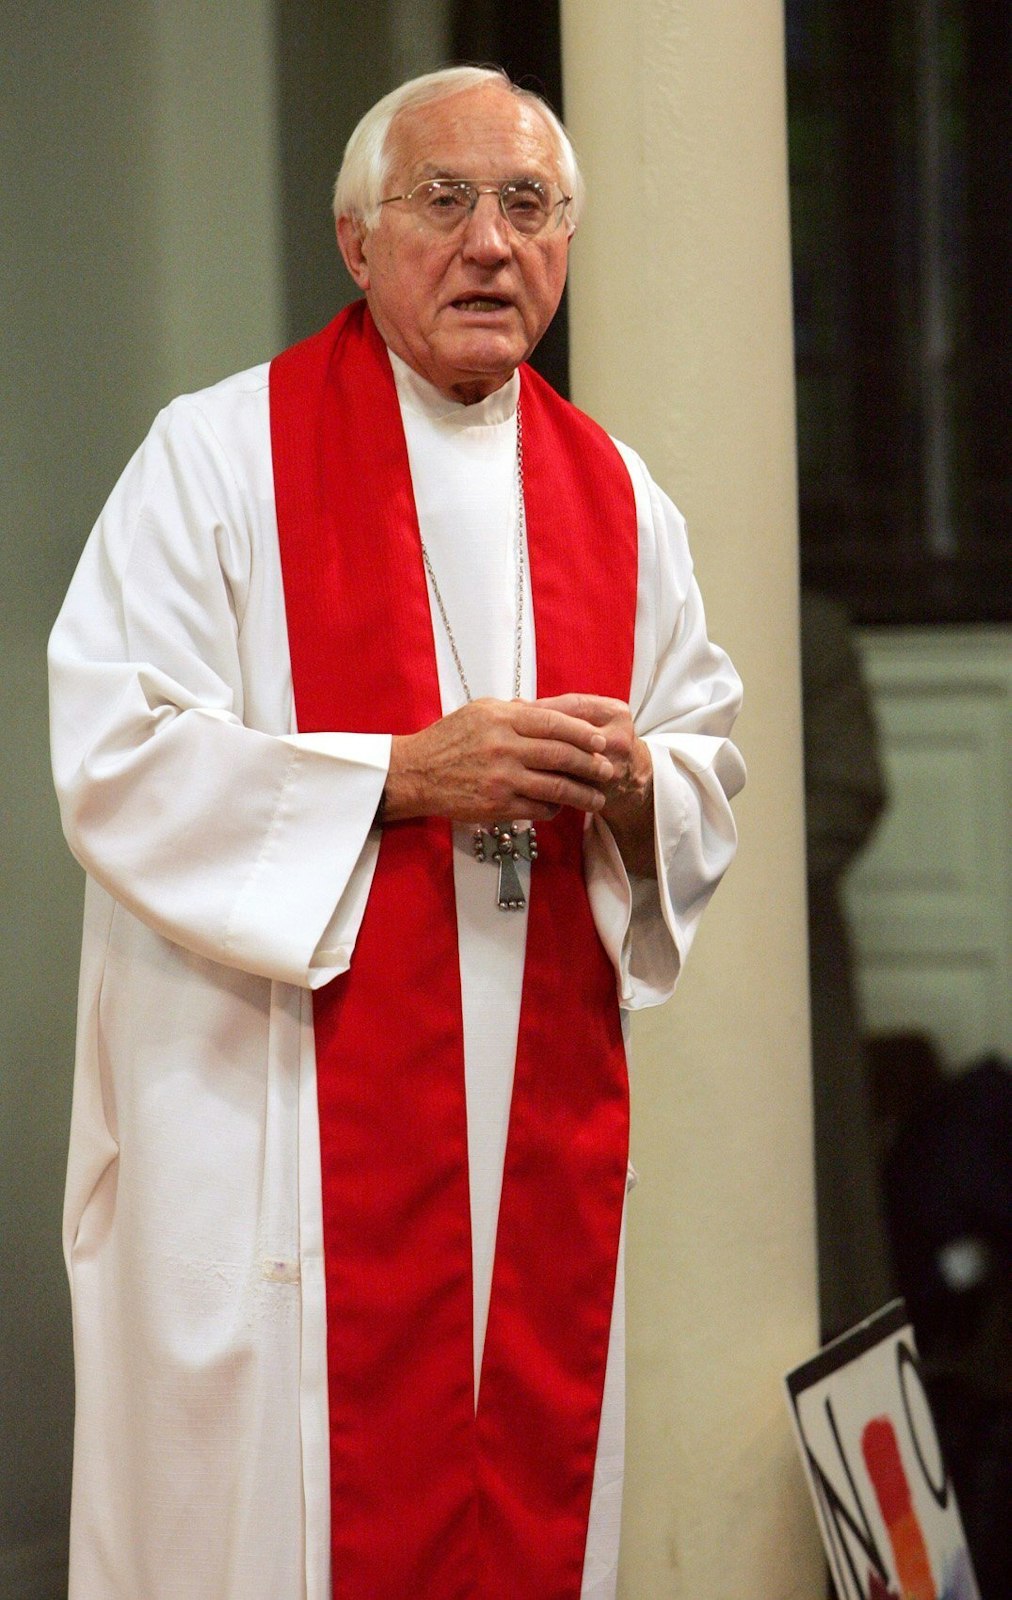 Bishop Gumbleton was a co-founder of Pax Christi USA in 1972. The organization has worked to help Catholics understand the connection between economic justice, racial equality and military spending throughout its 50-year history. (CNS photo/Nancy Wiechec)